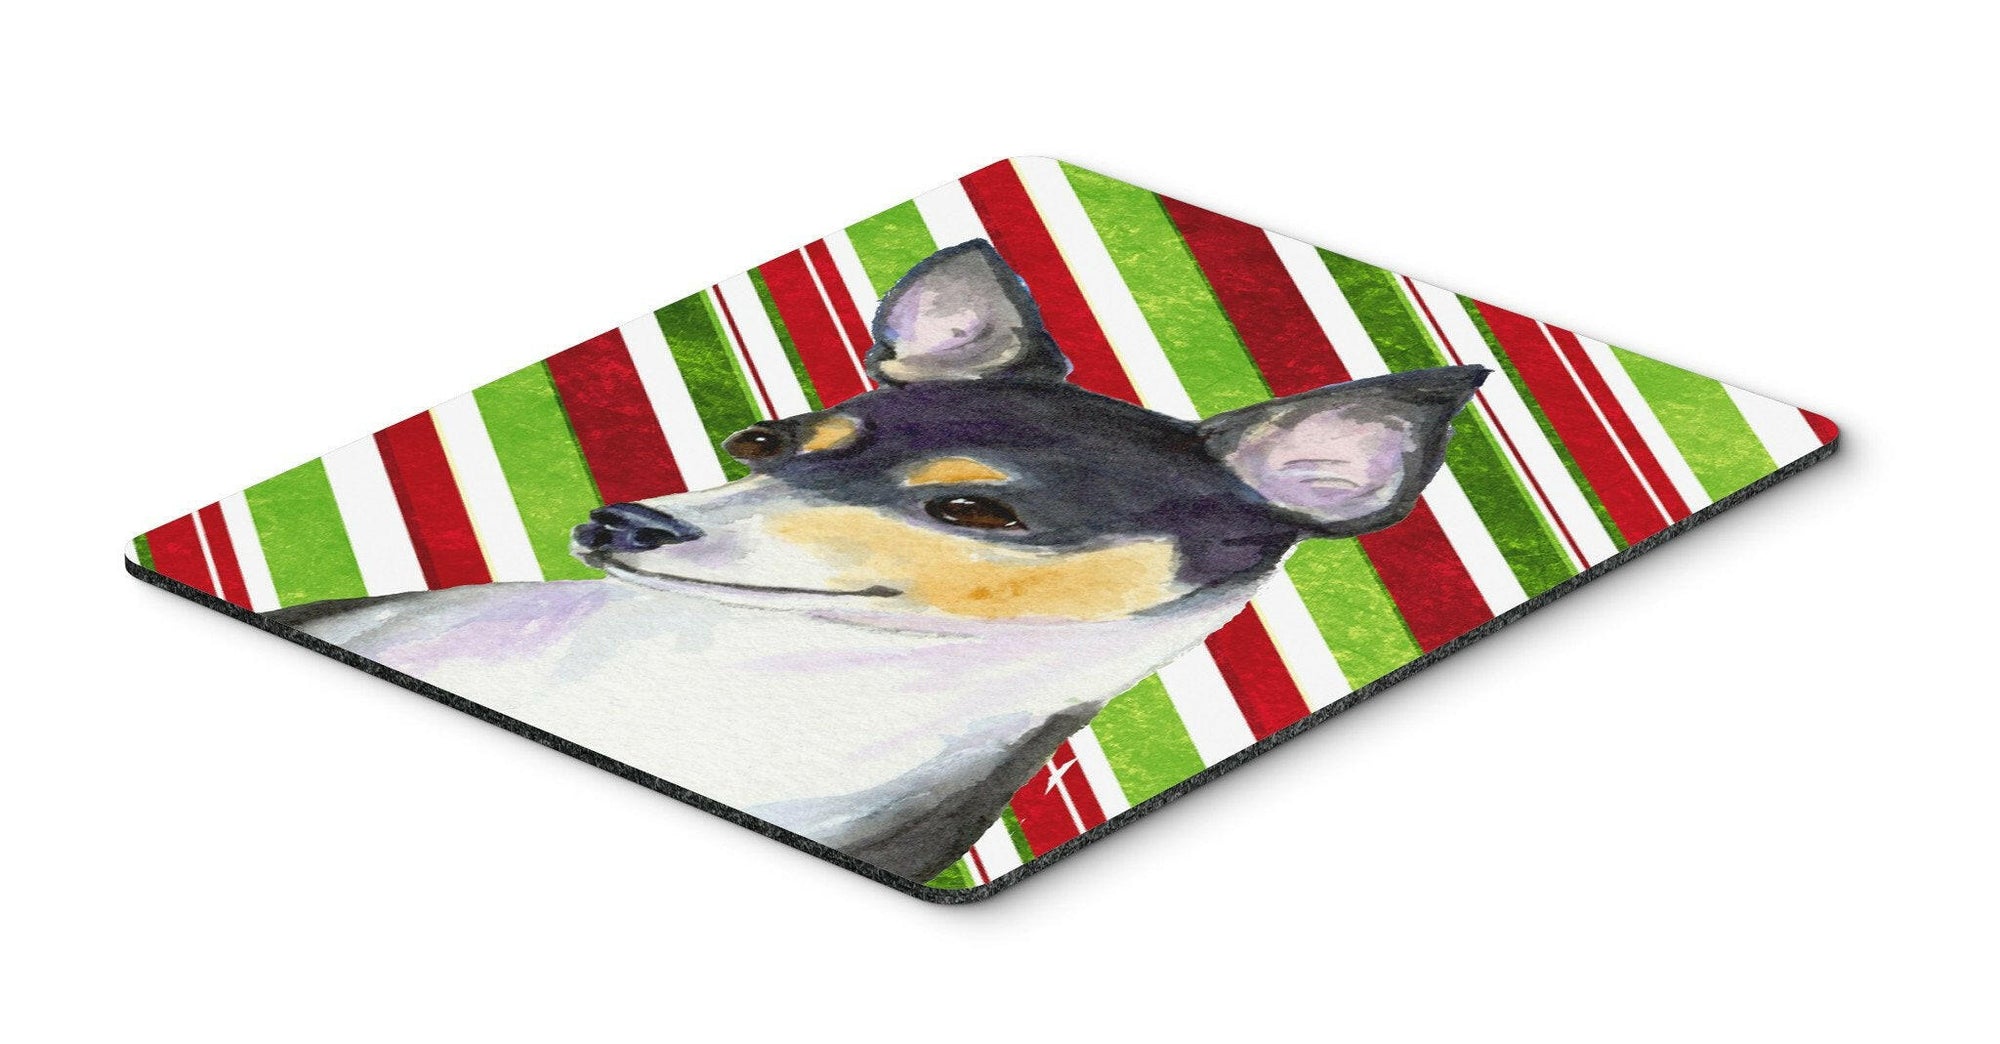 Chihuahua Candy Cane Holiday Christmas Mouse Pad, Hot Pad or Trivet by Caroline's Treasures